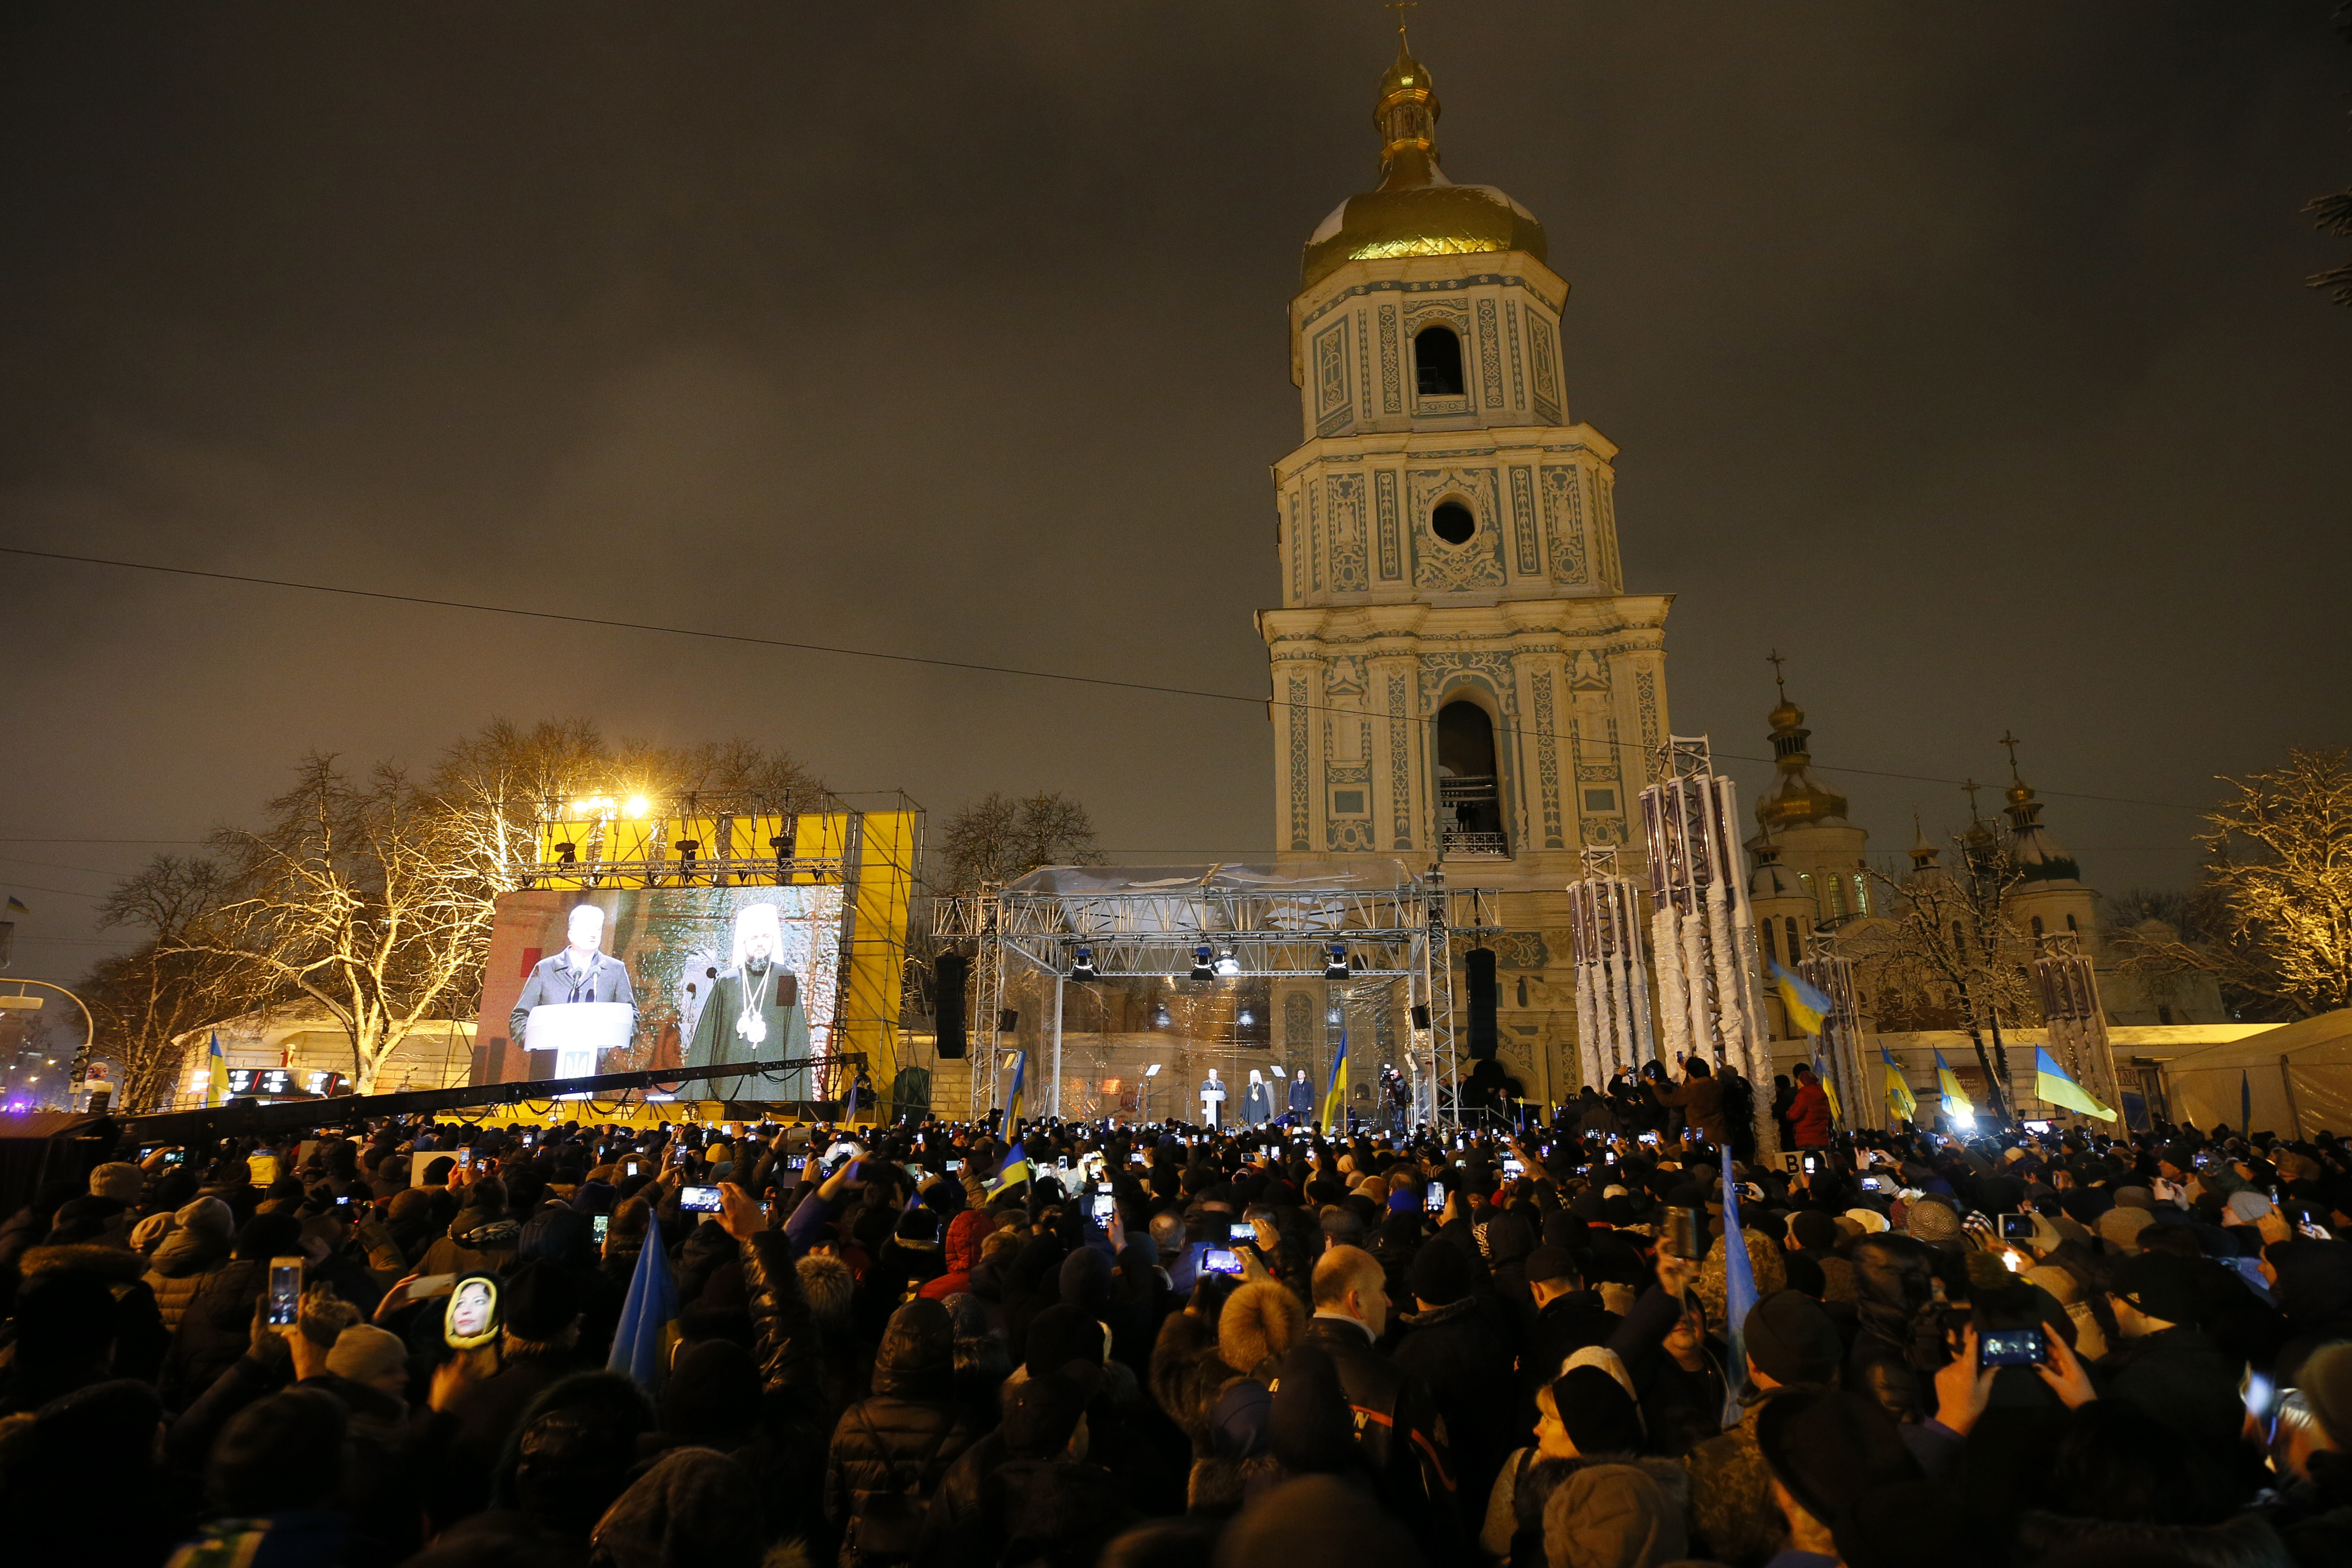 Ukrainian believers gather at the front of the Saint Sophia's Cathedral in Kyiv,